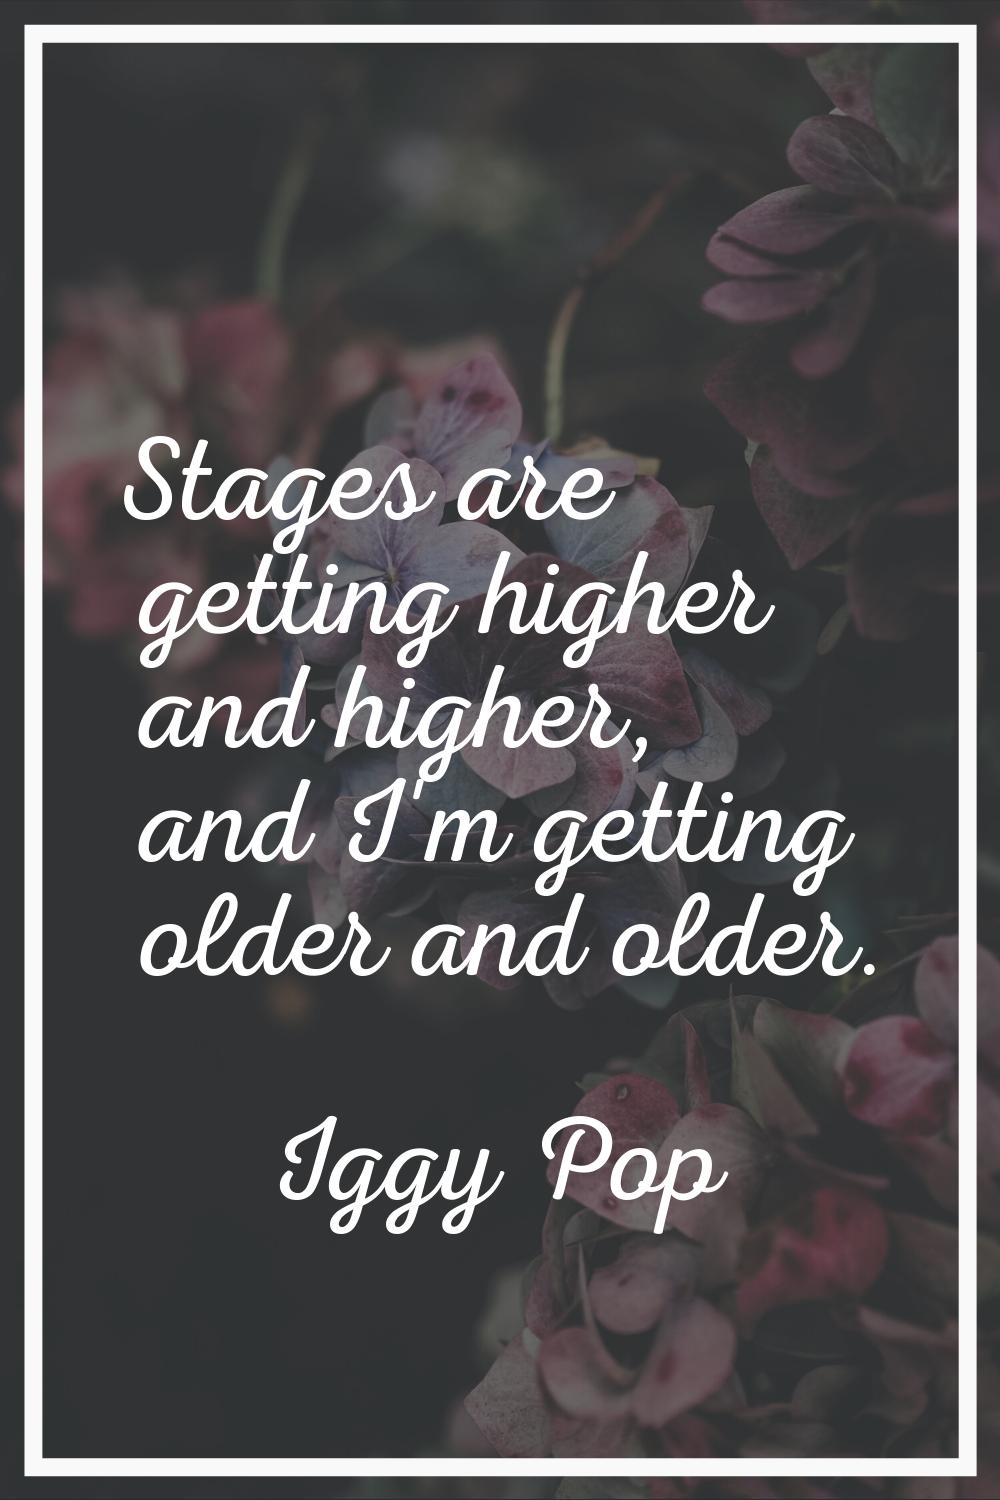 Stages are getting higher and higher, and I'm getting older and older.